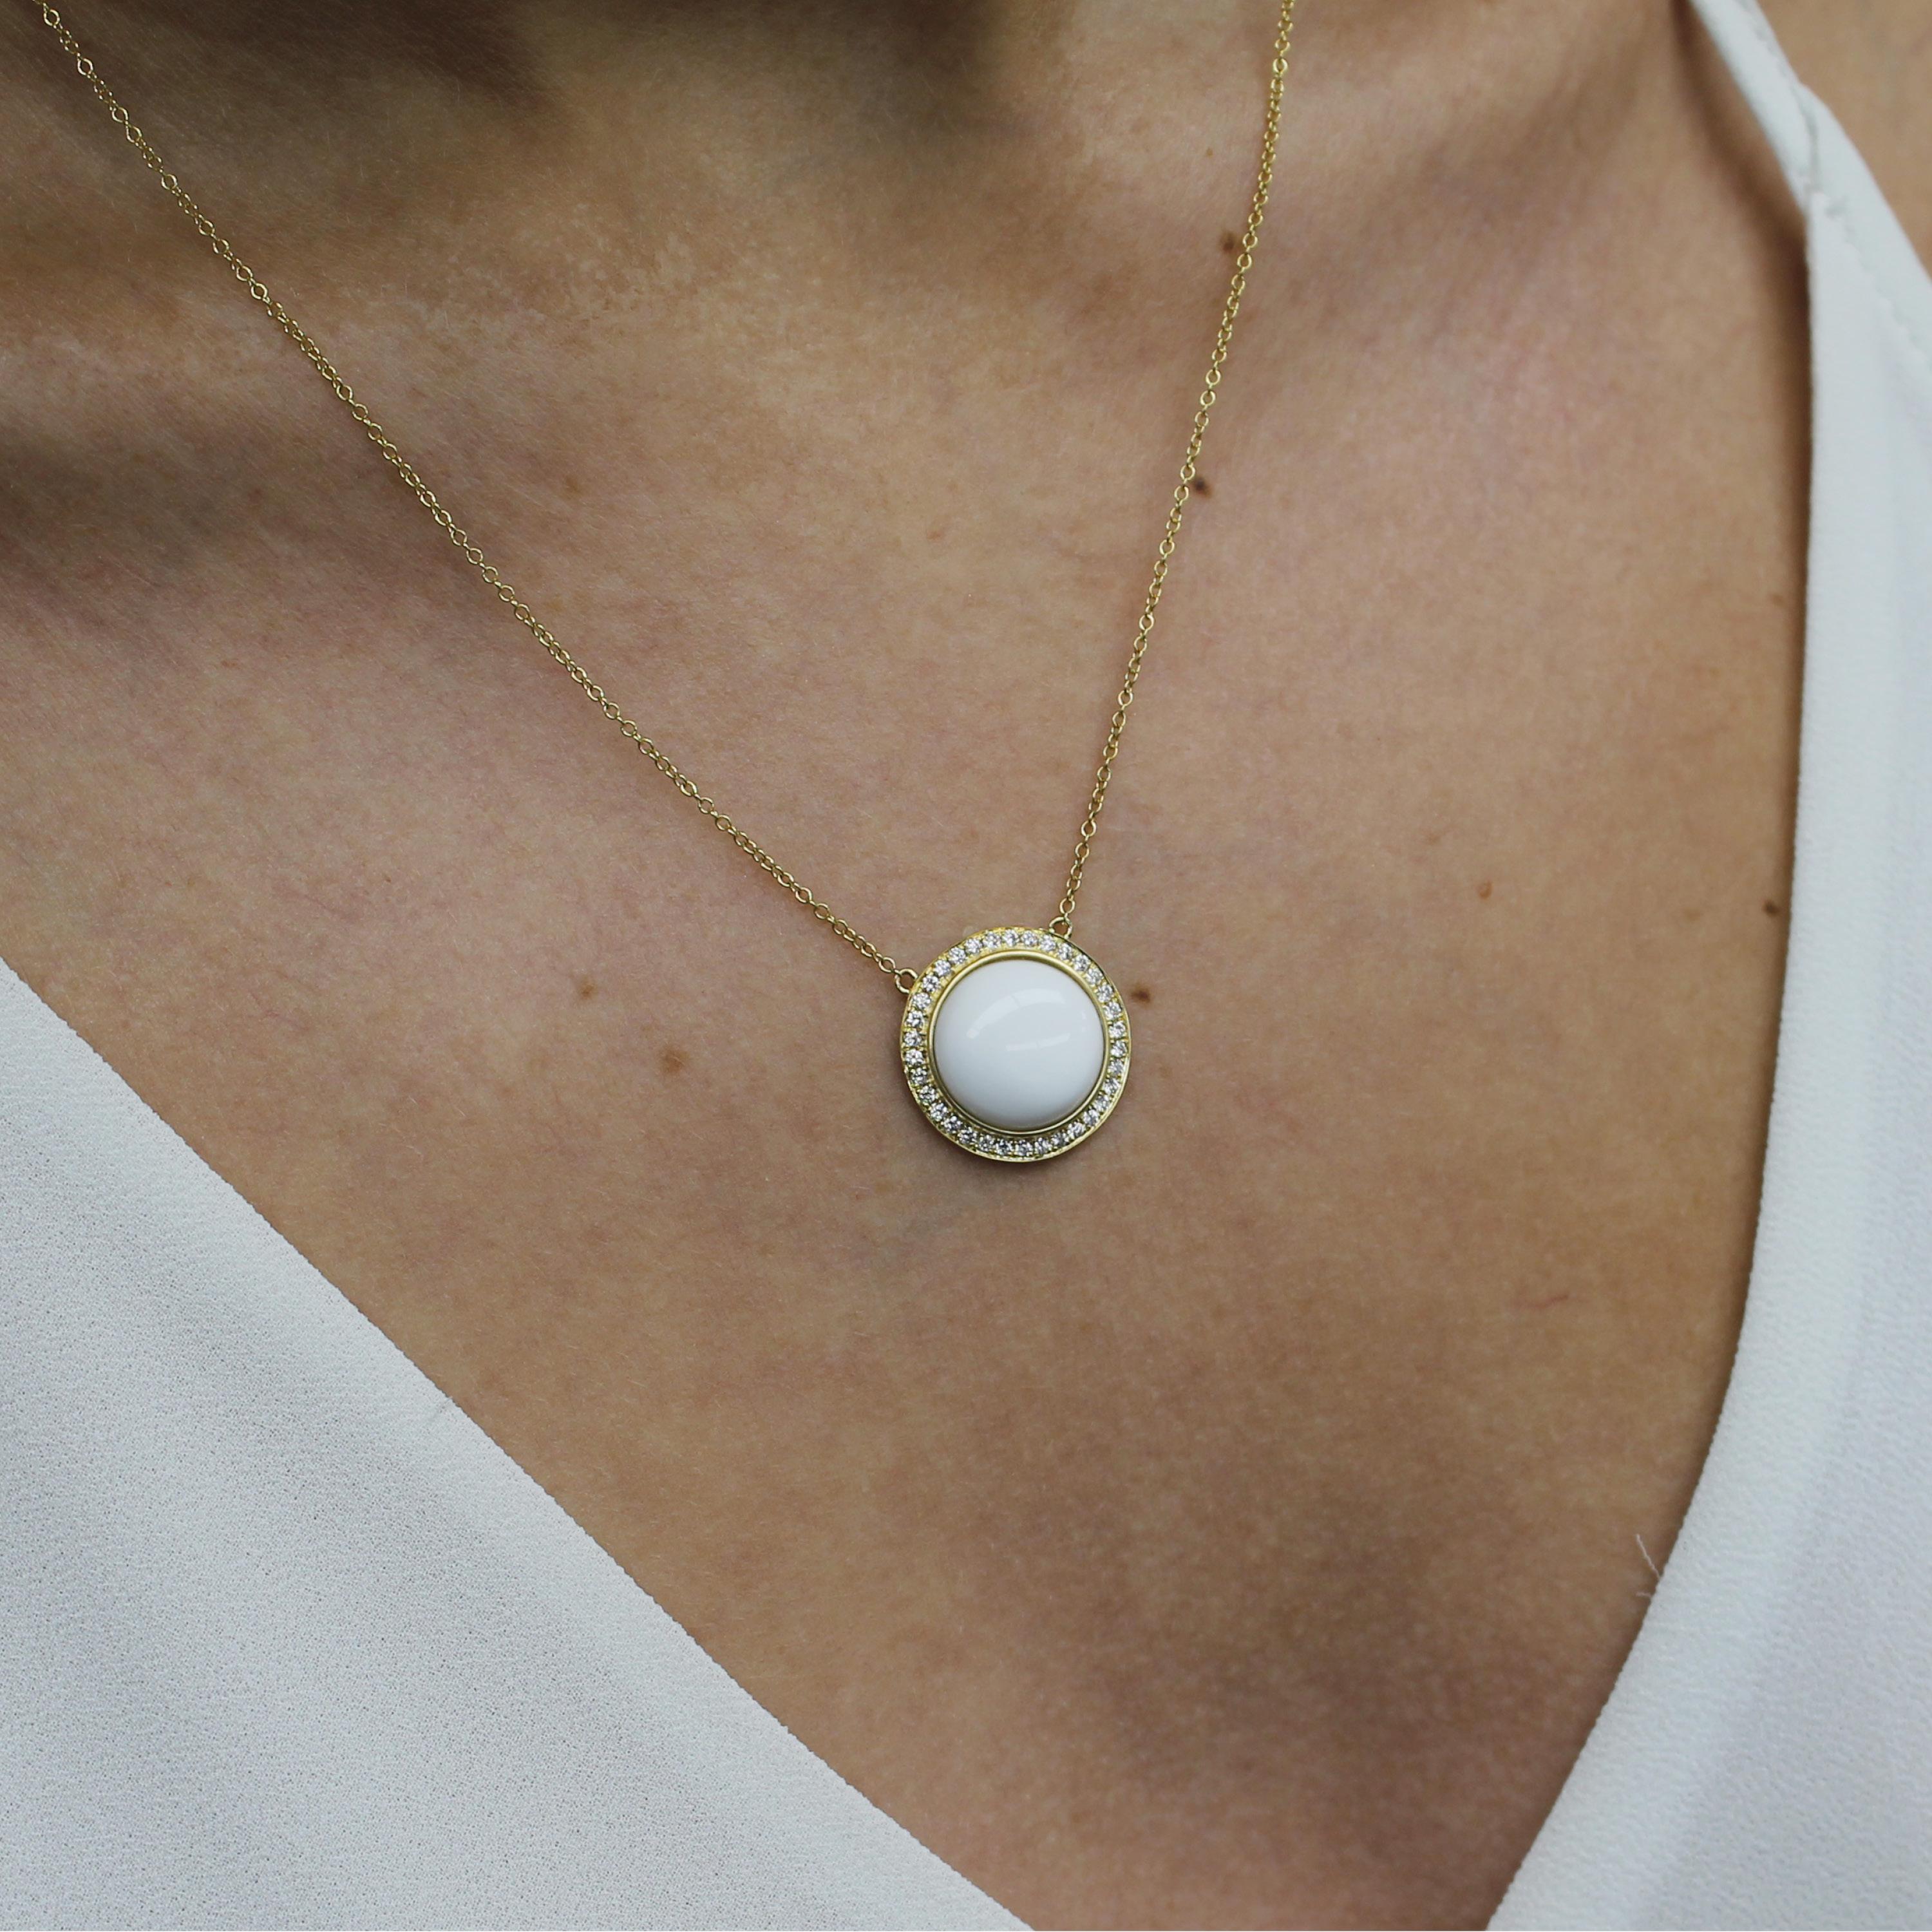 Mykonos Necklace featuring a Cabochon-Cut Round White Agate with Diamond Halo, framed in 18K yellow gold. 18-inch 18K Yellow Gold Chain, with adjuster at 16-inches. The Mykonos collection from Doves by Doron Paloma pays homage to the serene blue